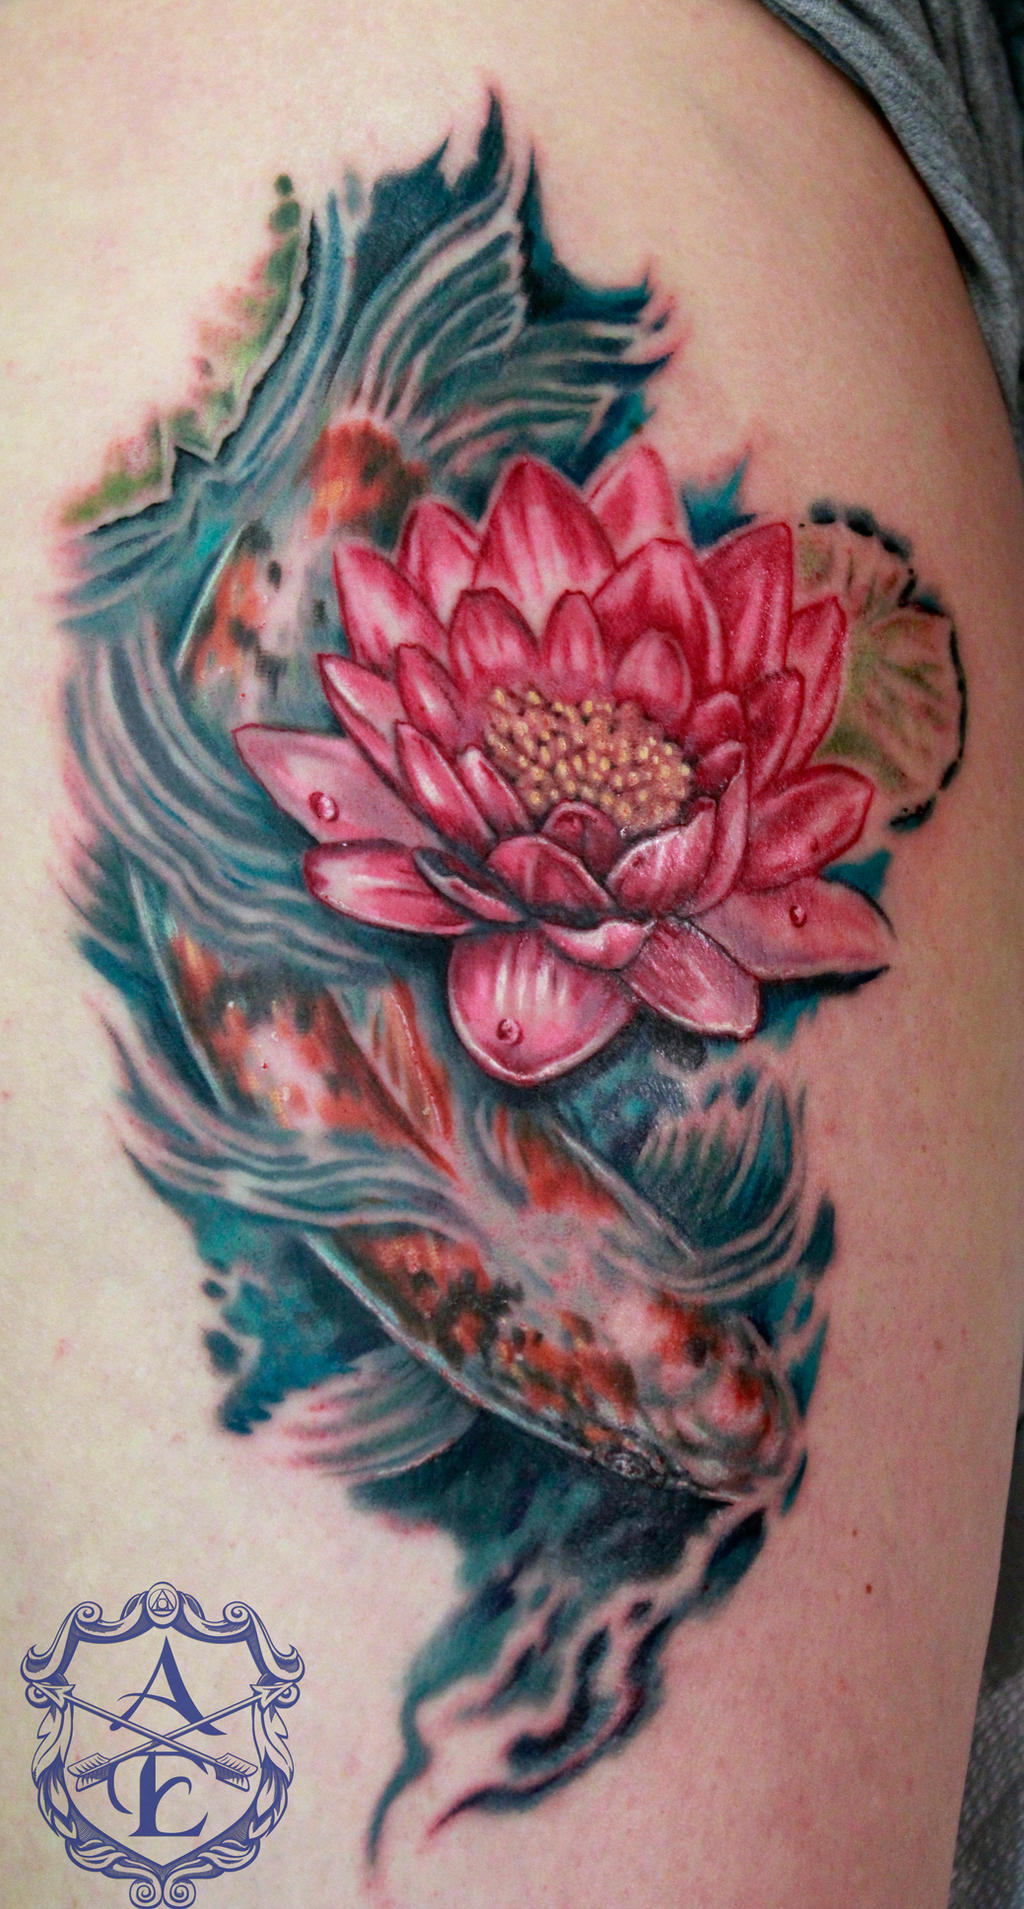 Lotus Flower with Koi Fish Tattoo by seanspoison on DeviantArt